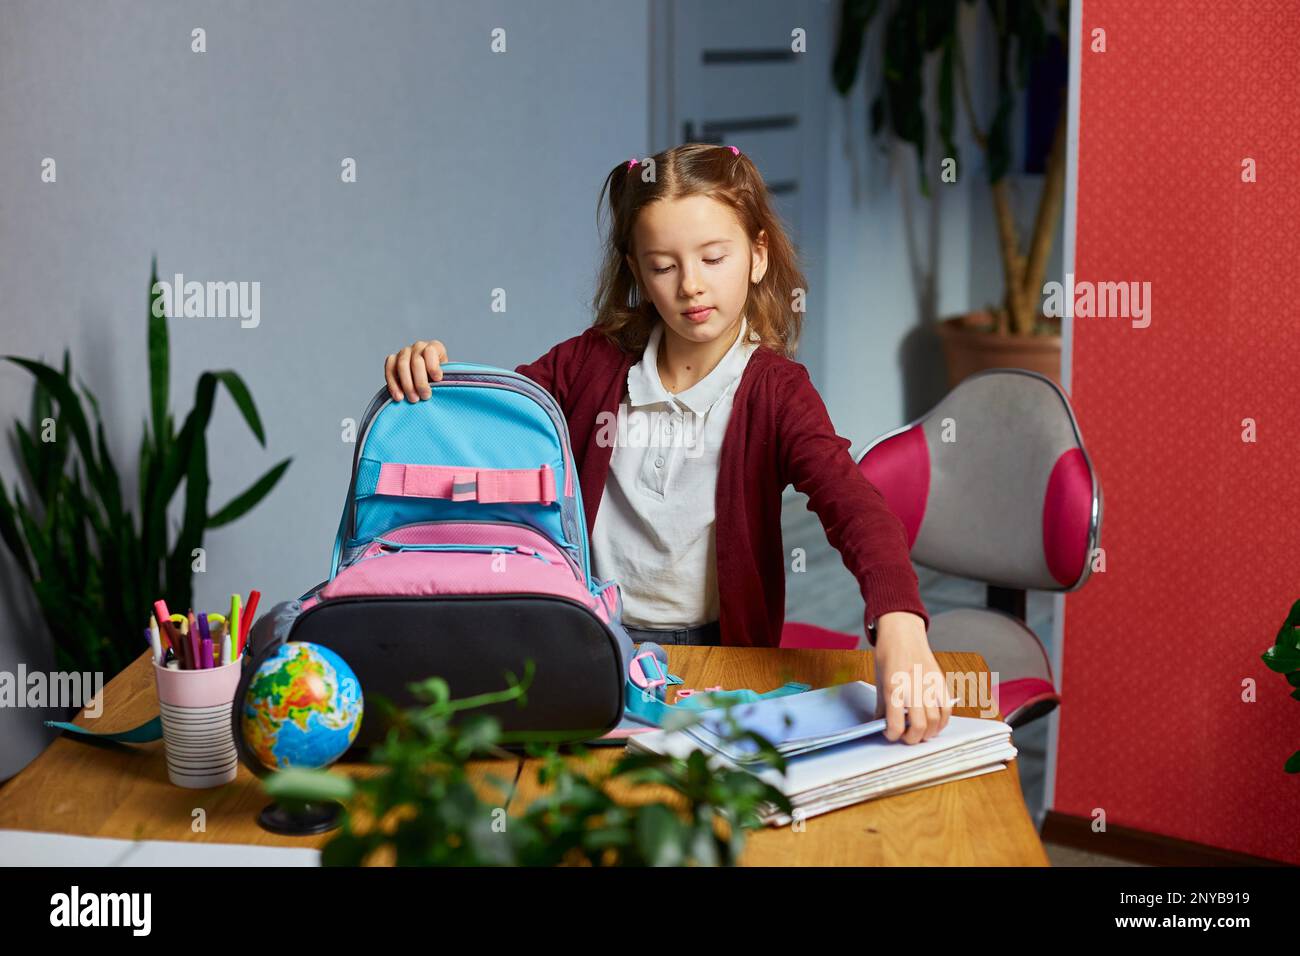 Girl packing school books in bag Stock Photos and Images